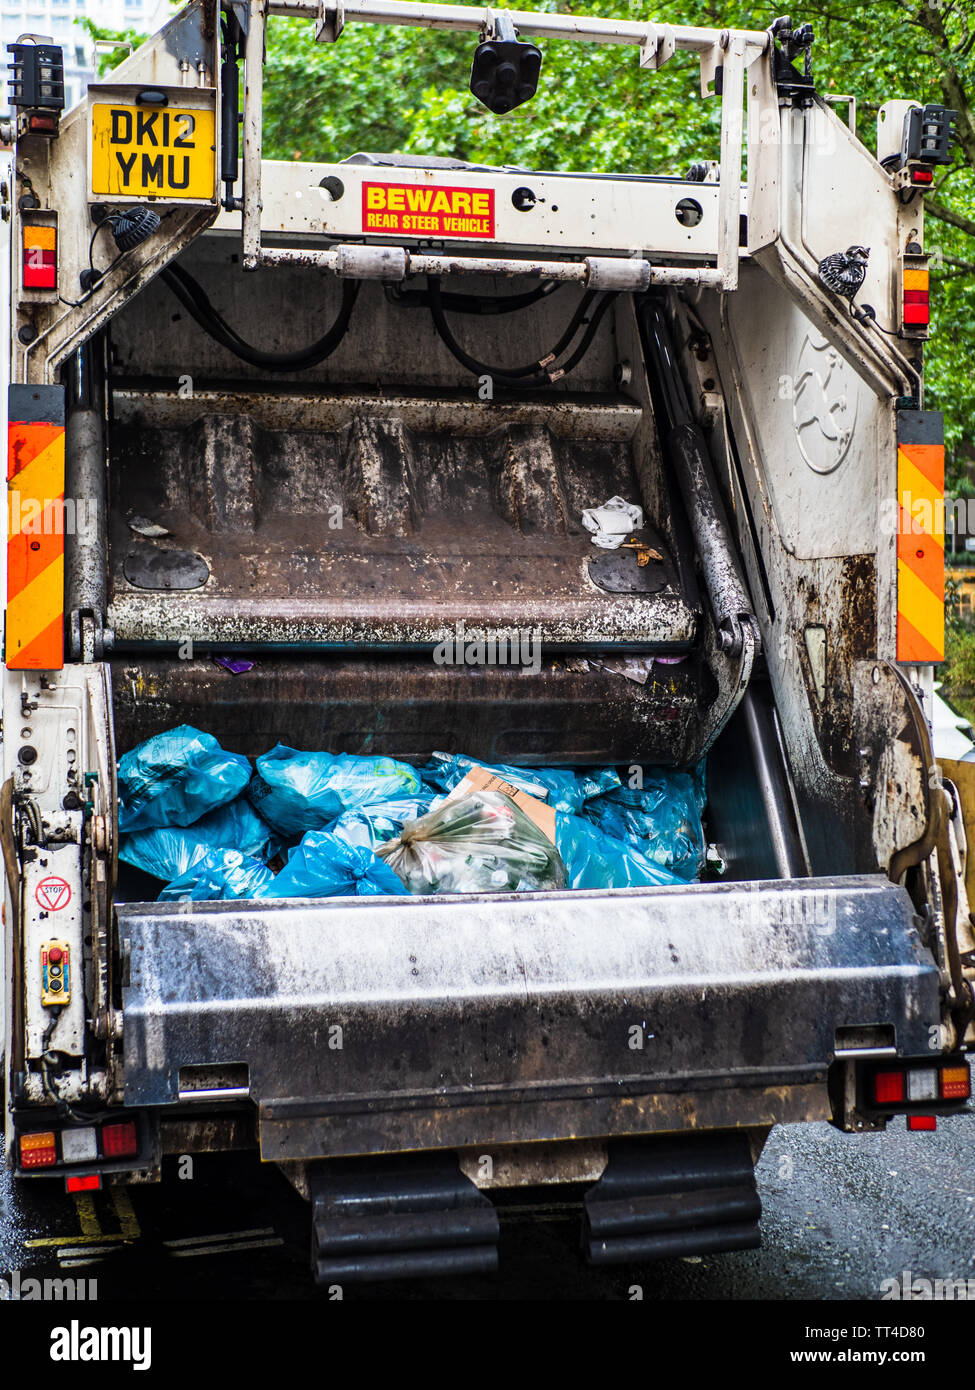 Refuse Collection Truck or Bin Lorry London - London Rubbish Truck picking up waste in Central London. Refuse Sack Collection. Bin Bag Collection. Stock Photo